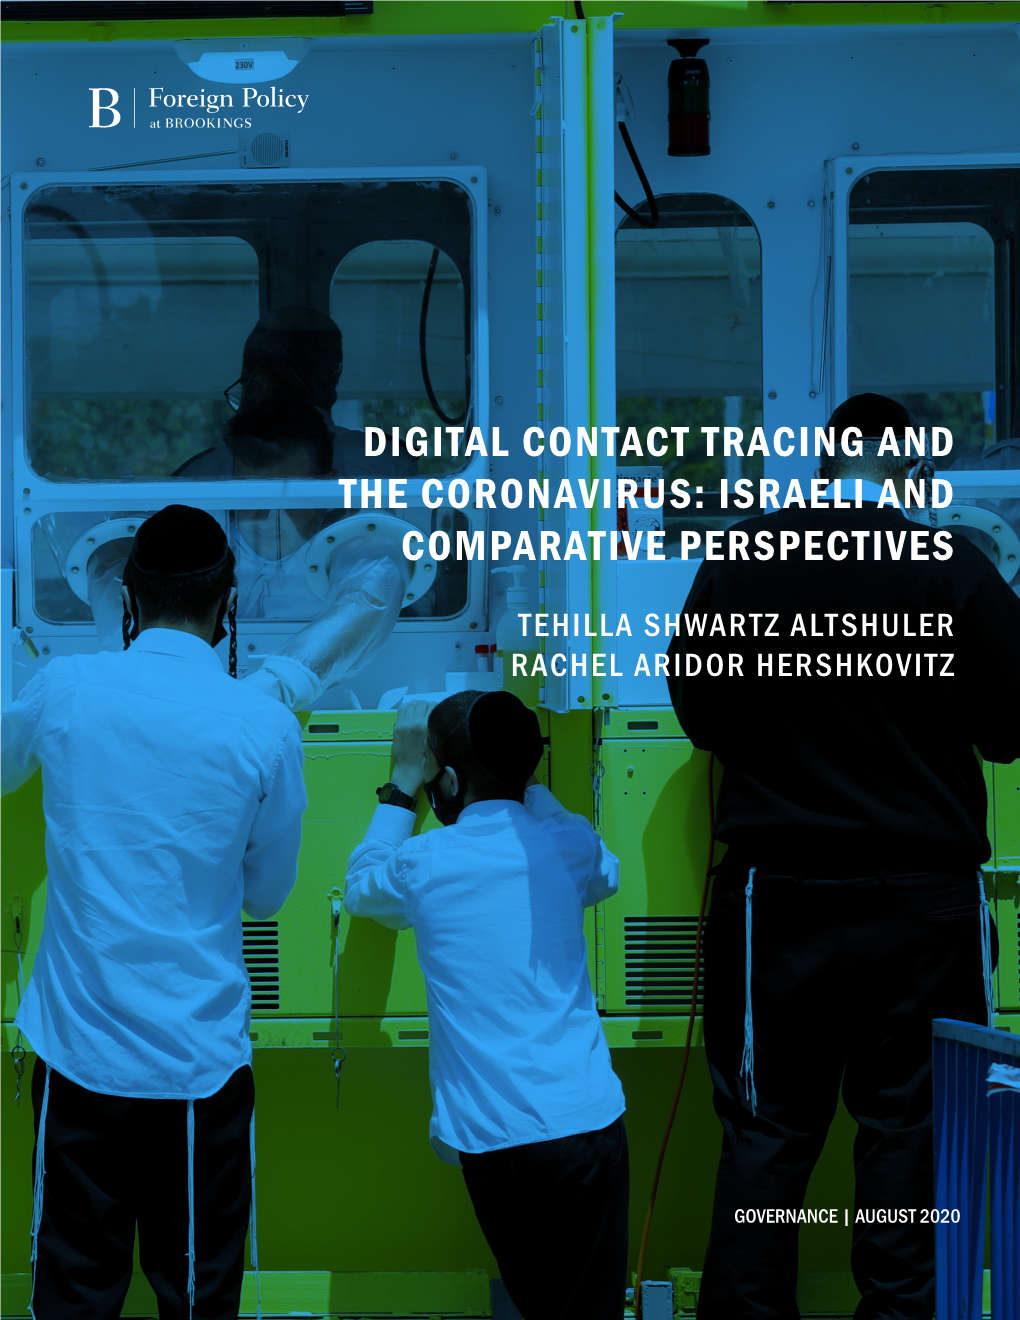 Digital Contact Tracing and the Coronavirus: Israeli and Comparative Perspectives